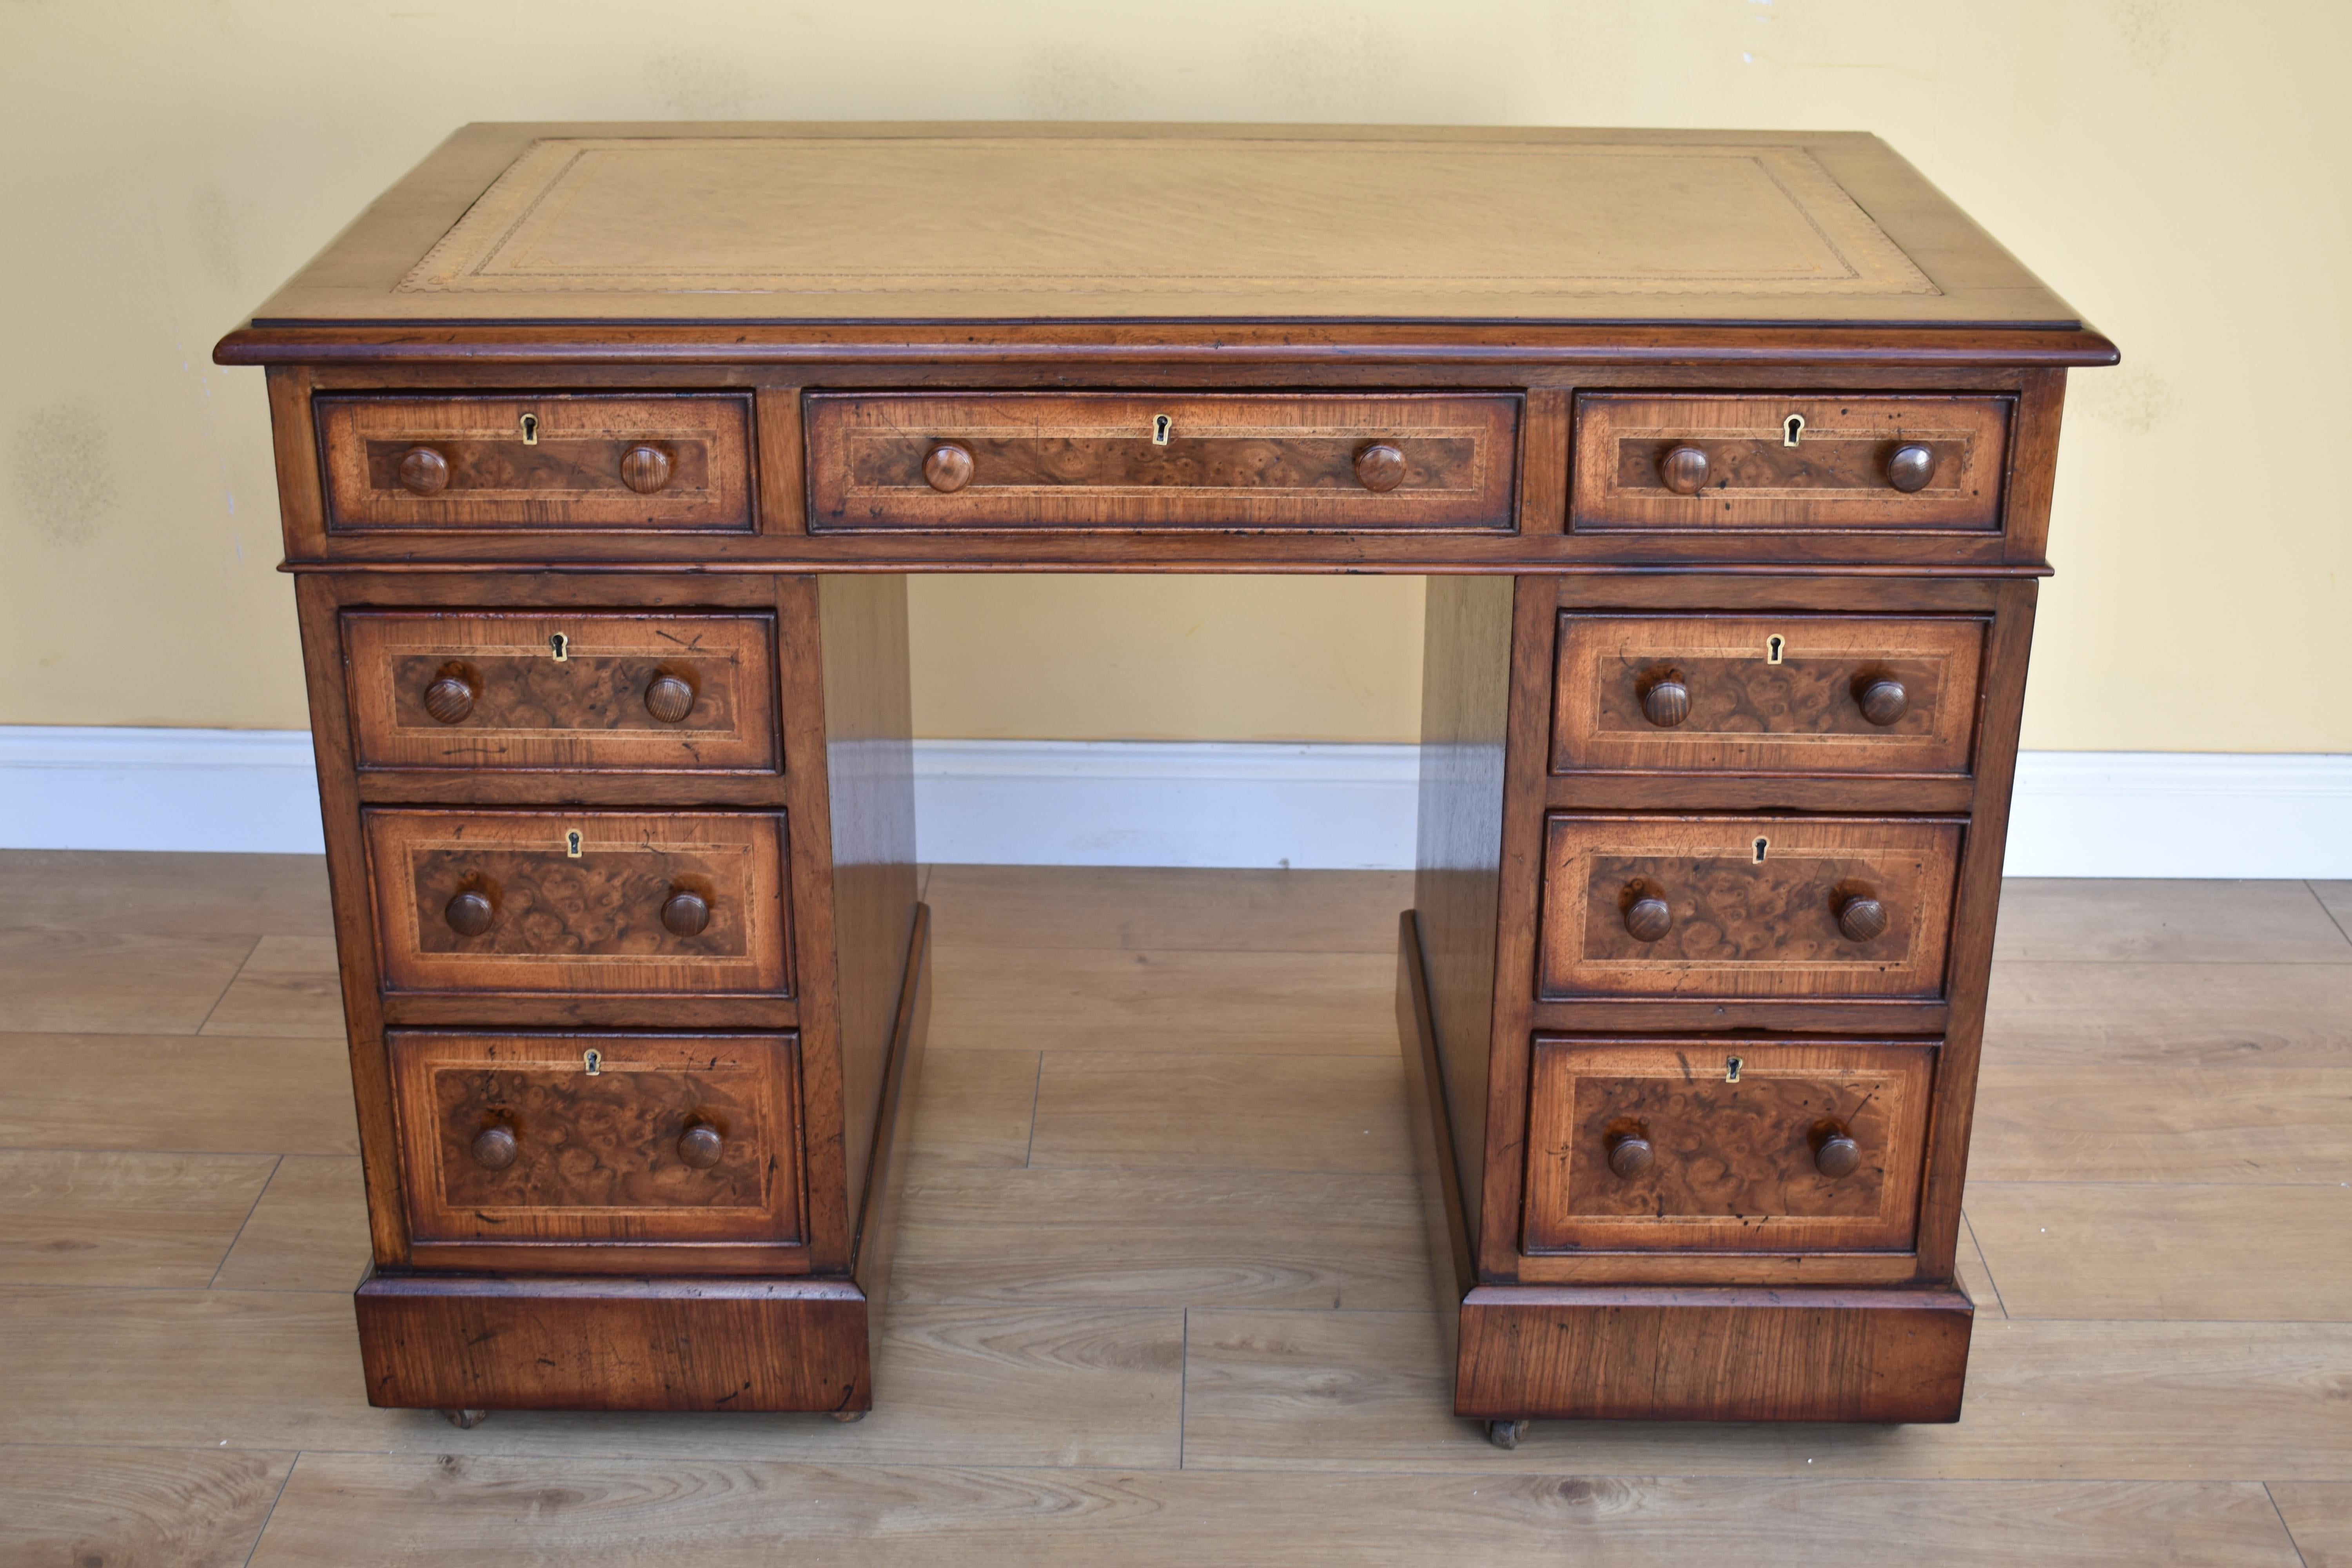 For sale is a good quality 19th century Victorian burr walnut pedestal desk. The desk top is inset with a leather skiver, decorated with gold tooling. Below this three drawers, each with walnut banding and turned handles. The top fits onto two